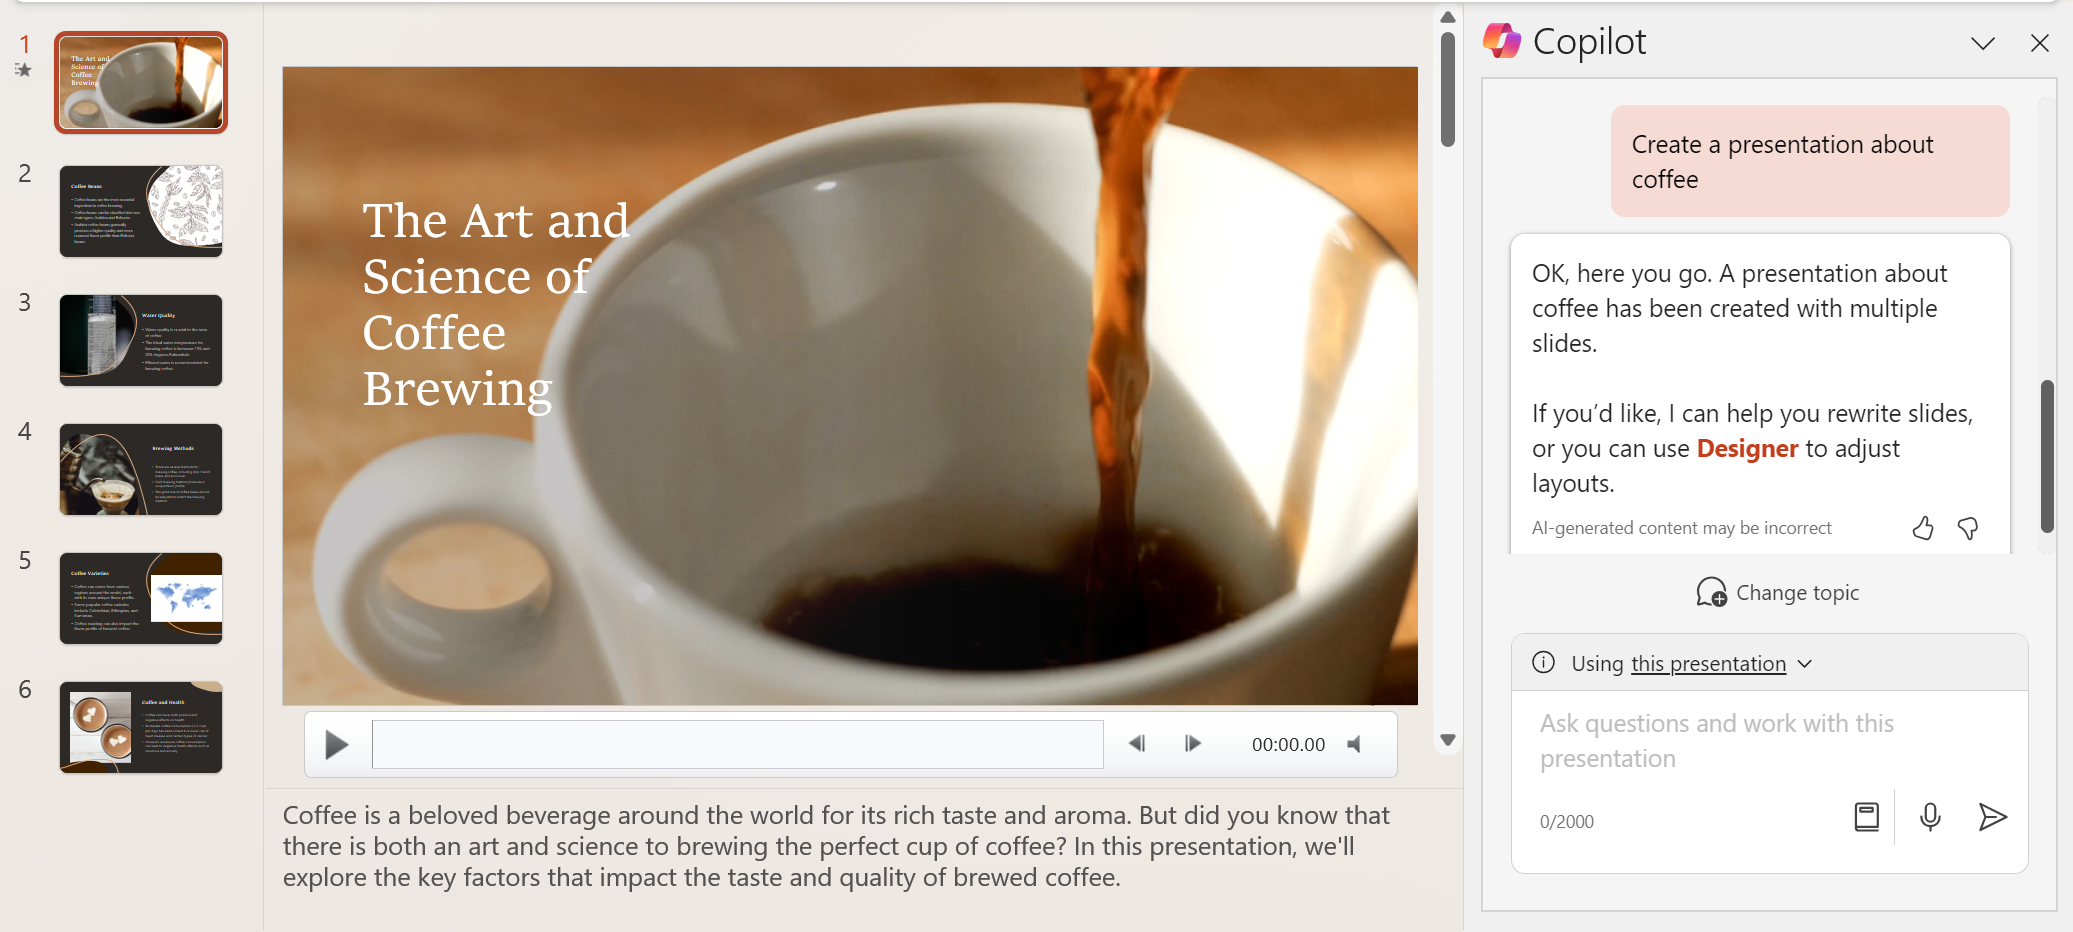 Screenshot of result of Microsoft Copilot for Microsoft 365 in PowerPoint after asking Copilot to build a presentation about coffee. The slides now show content about coffee.